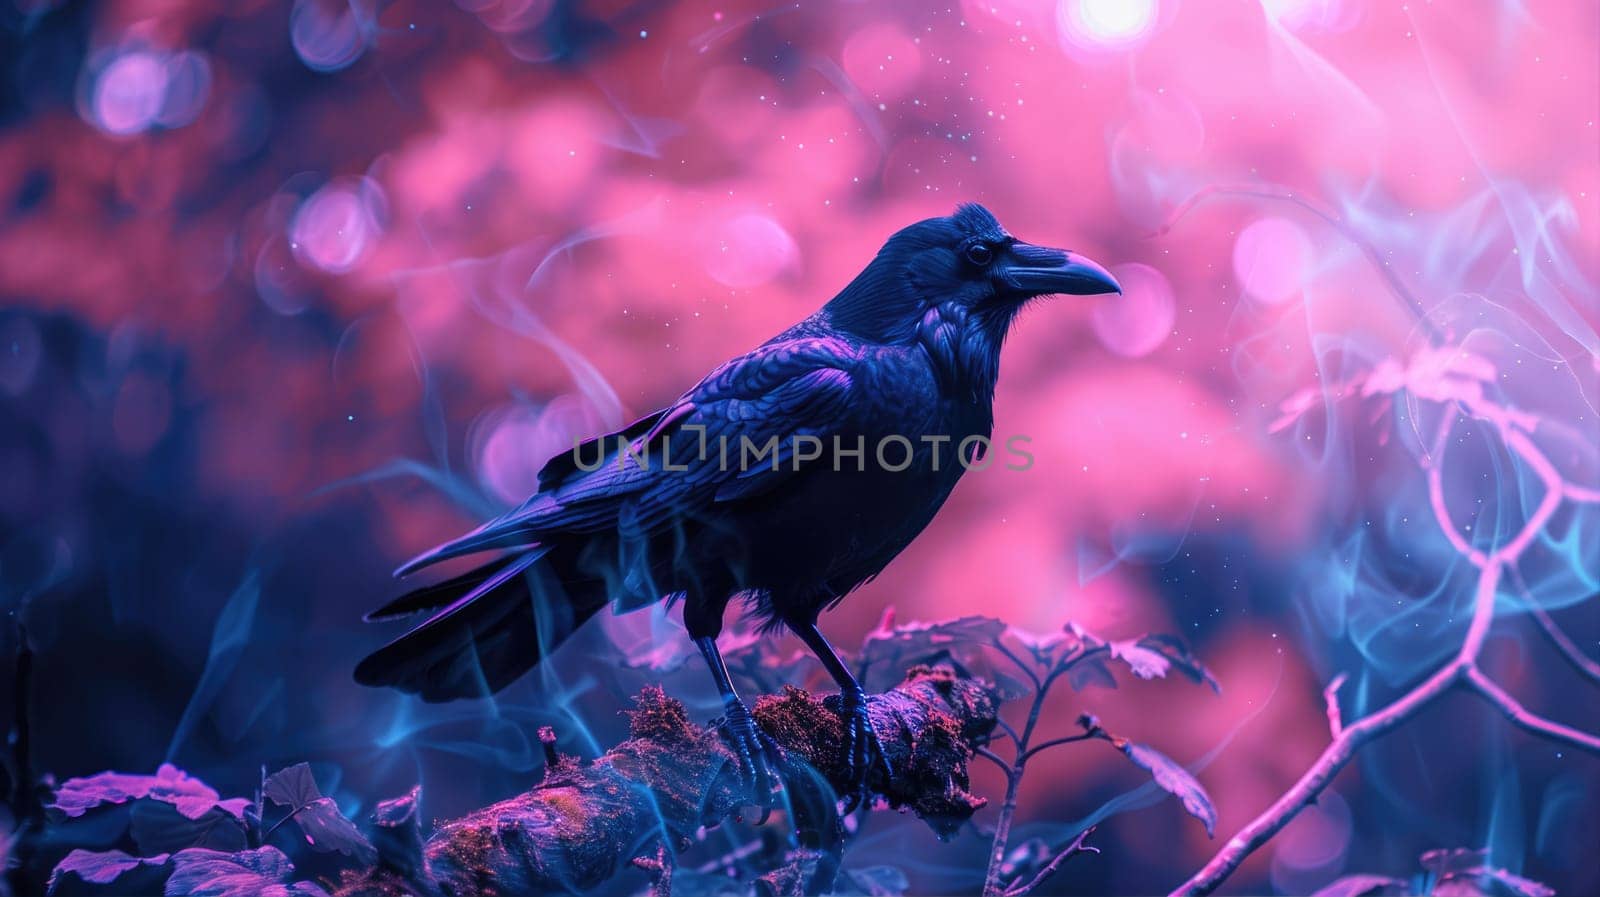 Black crows in misty forest. Fantasy world. Crow and magic atmosphere by natali_brill